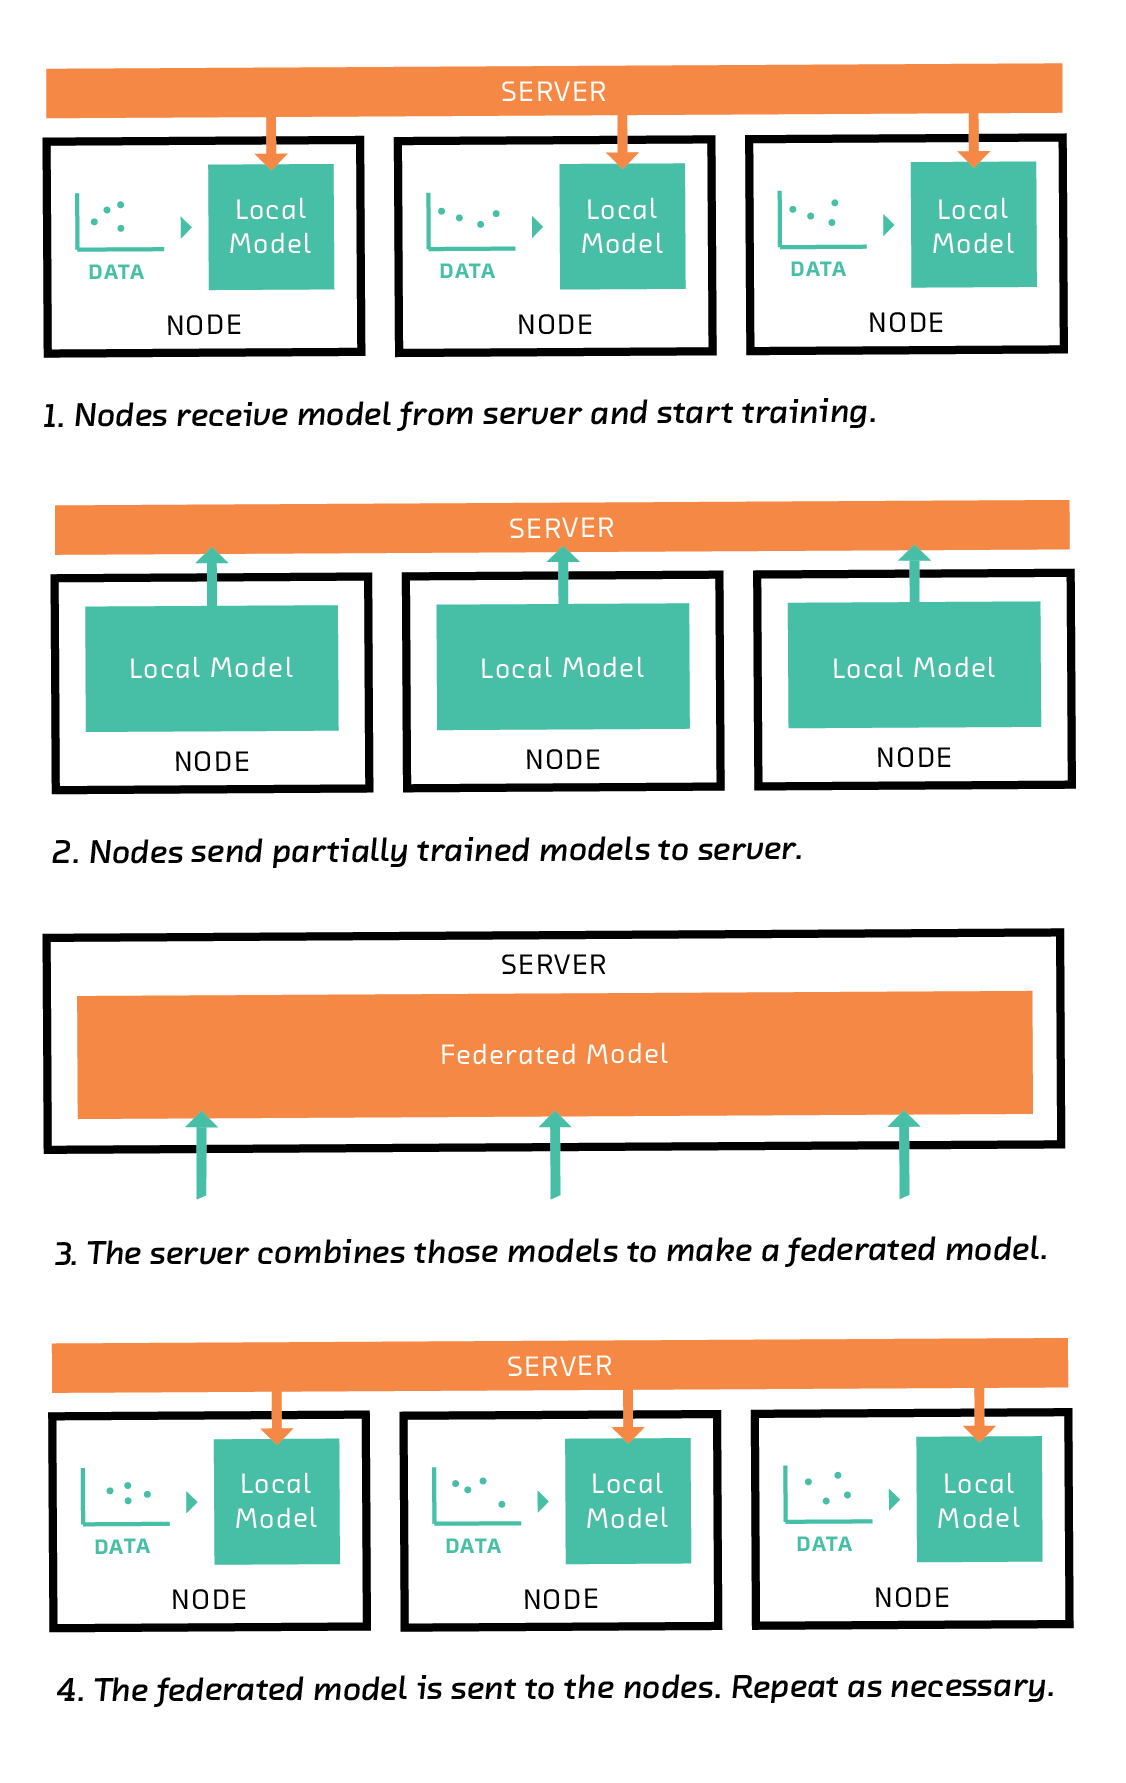 A diagram of federated learning. First, nodes receive the model from server and start training. Then, Nodes send their partially trained models to the server. The server takes those models and combines them to make a federated model. That federated model is sent back down to the nodes. Those models can be trained further locally as the cycle repeats.